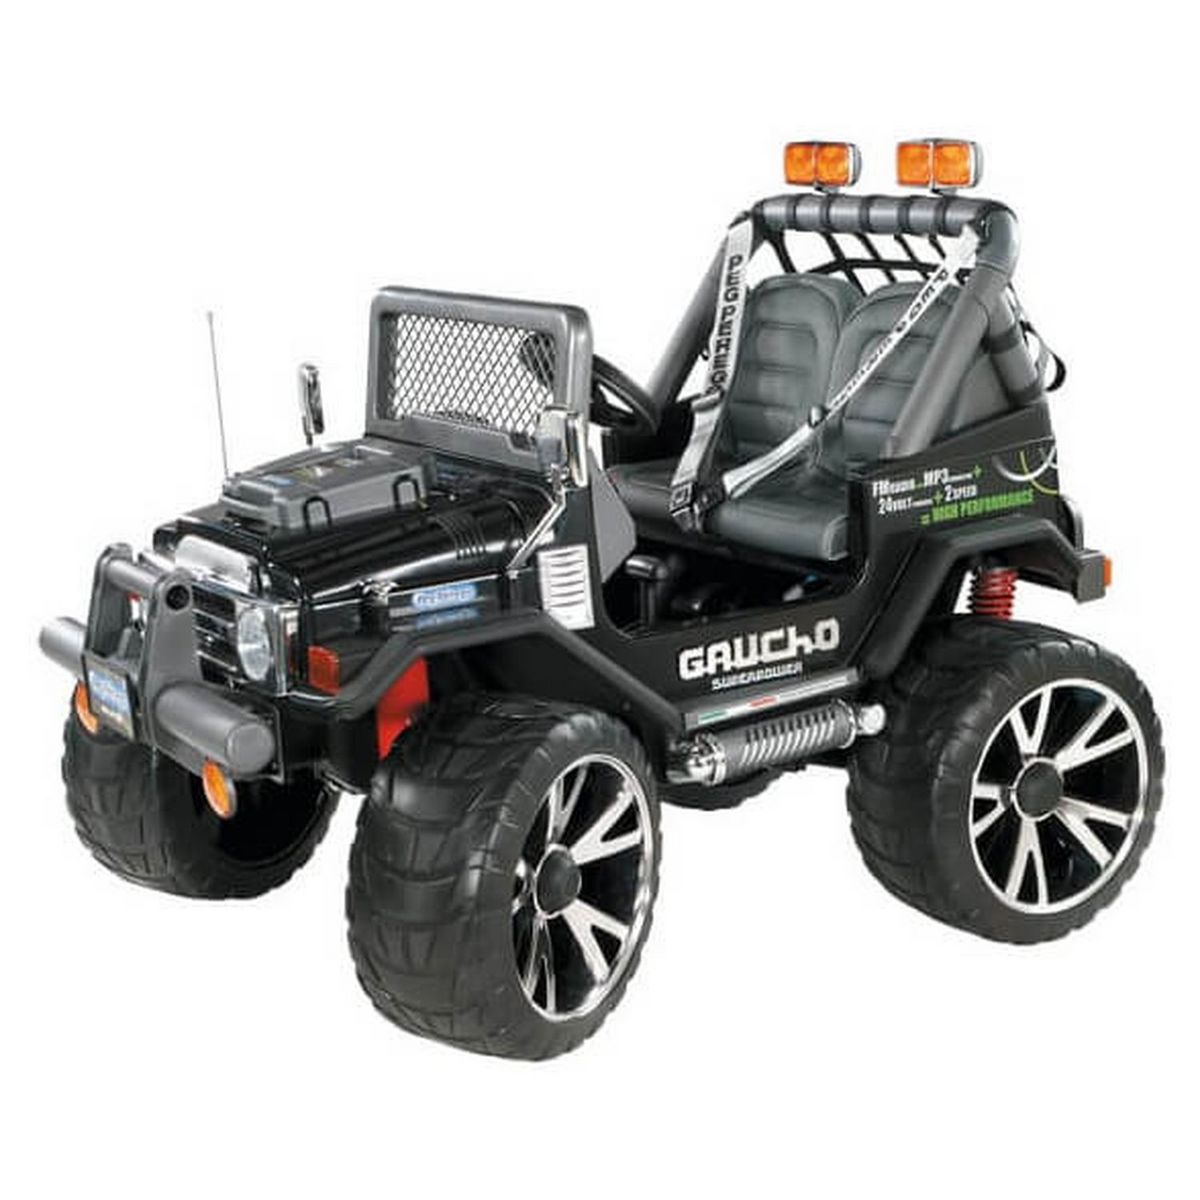 PEG PEREGO Véhicule Gaucho 4X4 SuperPower 24 V - 2 places